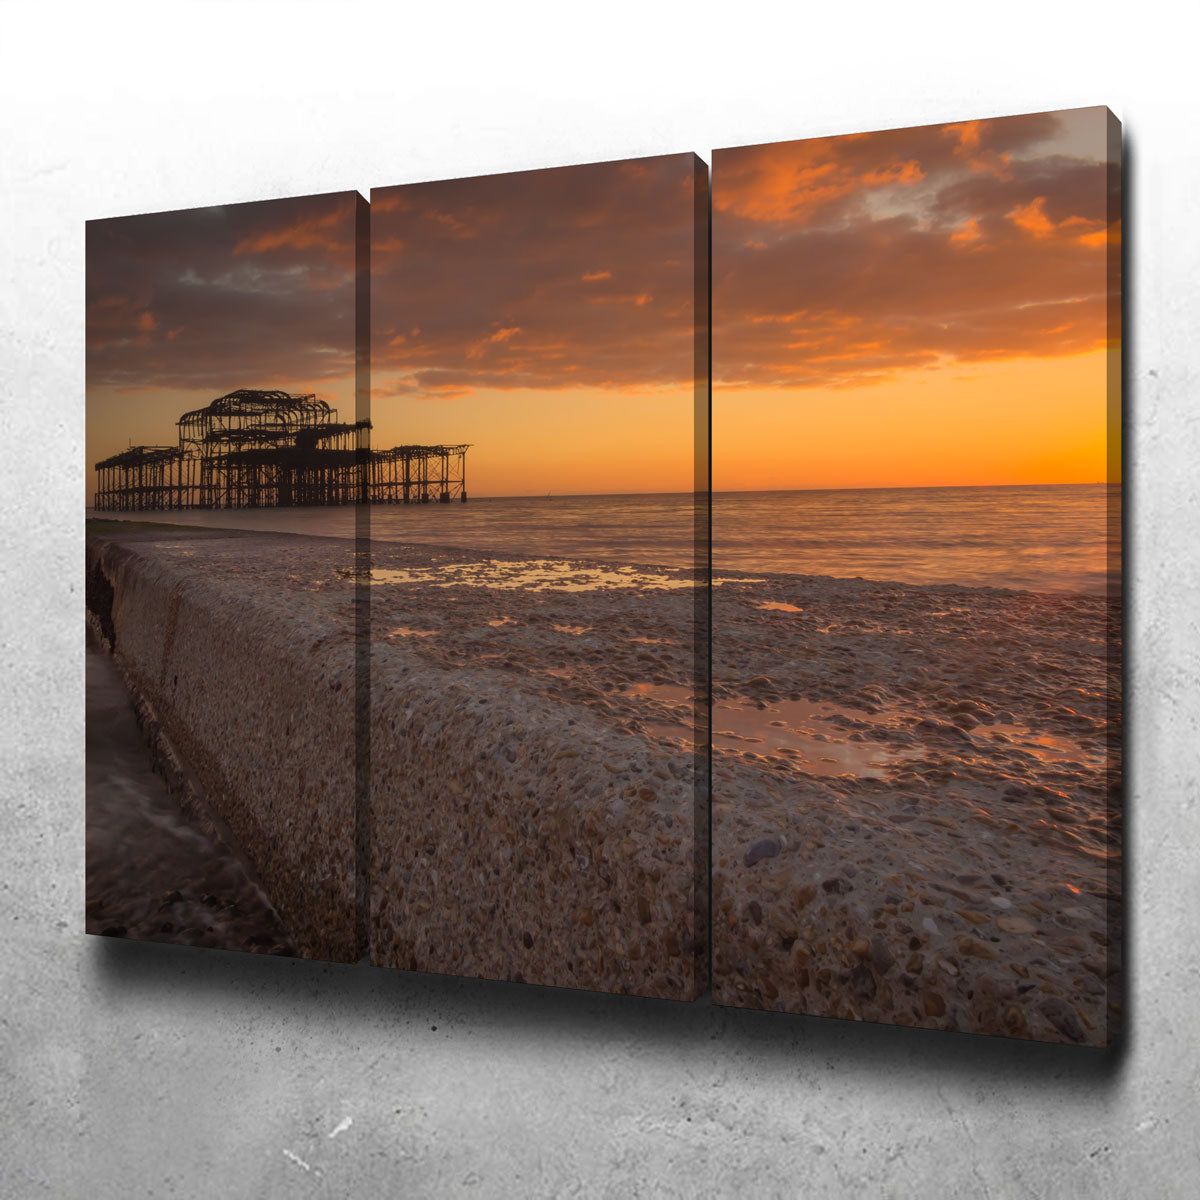 Sunset at West Pier